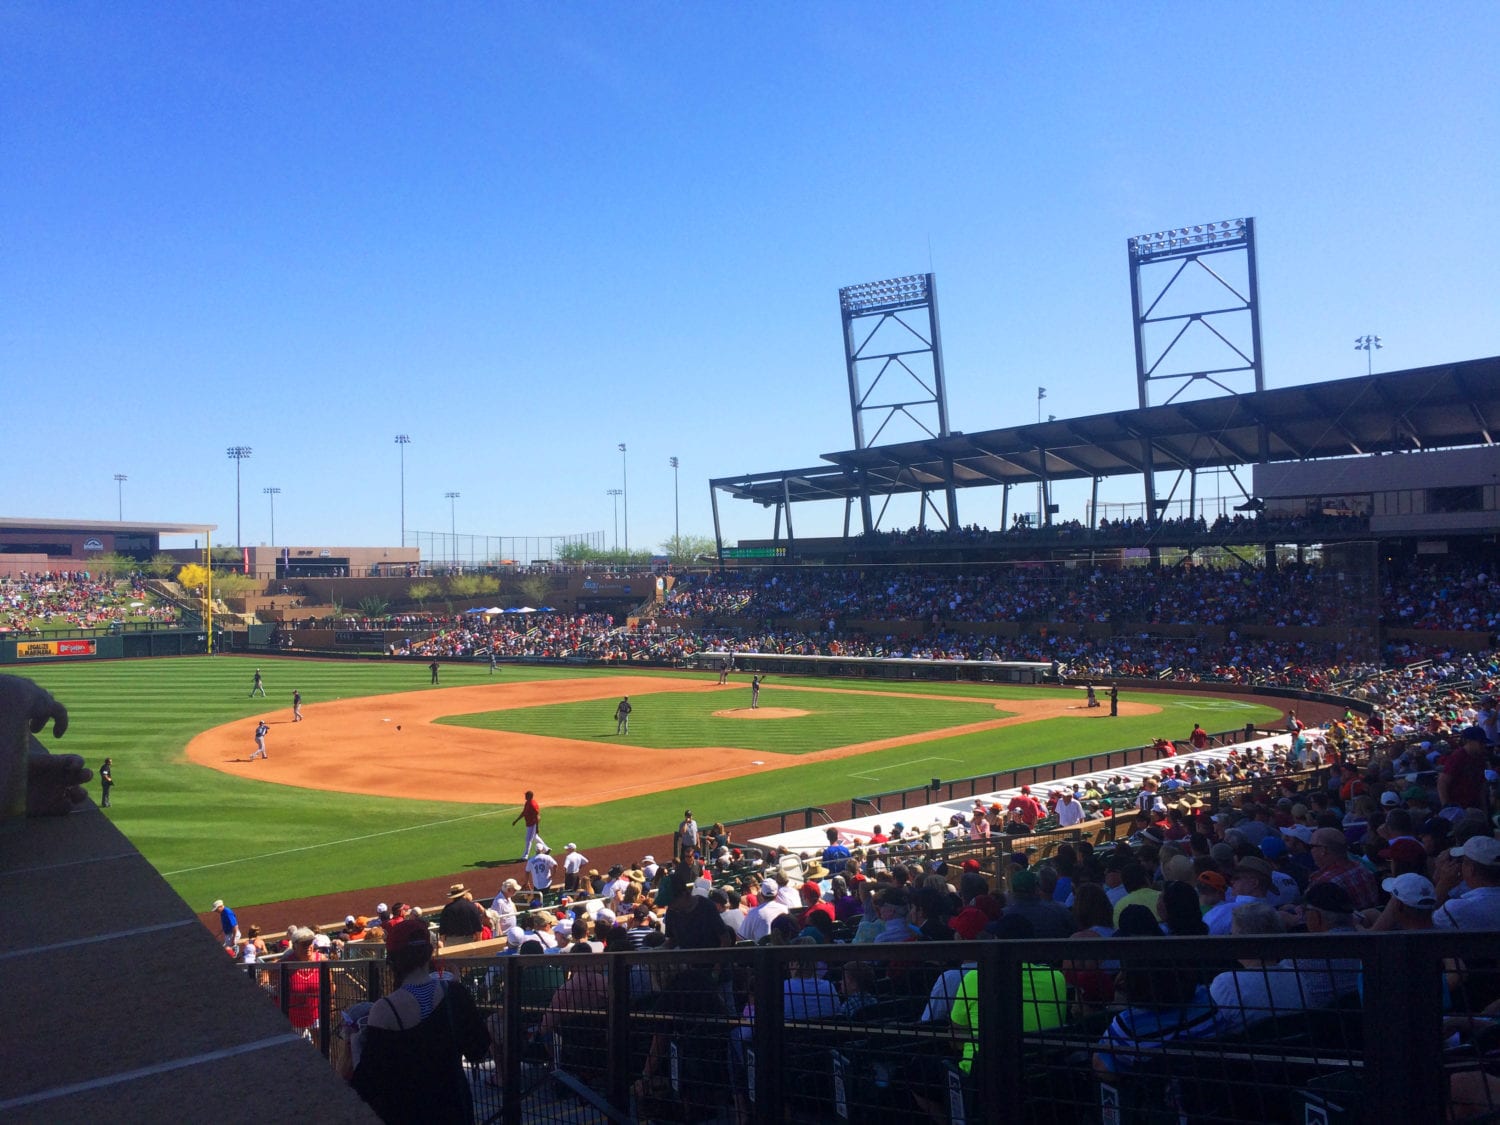 Outfield grass seats, Cactus League spring training baseball